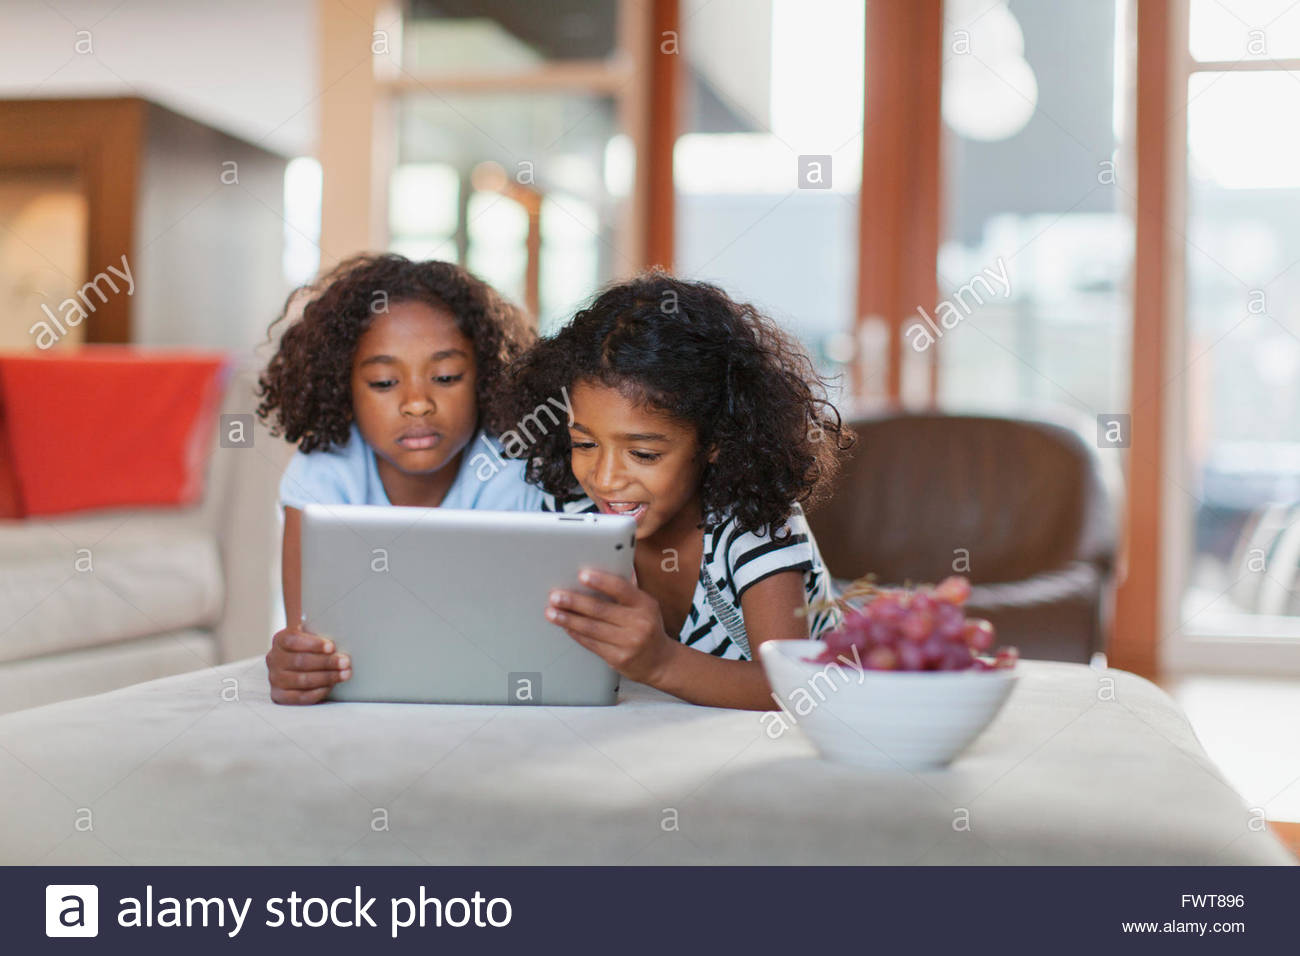 Little girls watching digital tablet at home Stock Photo